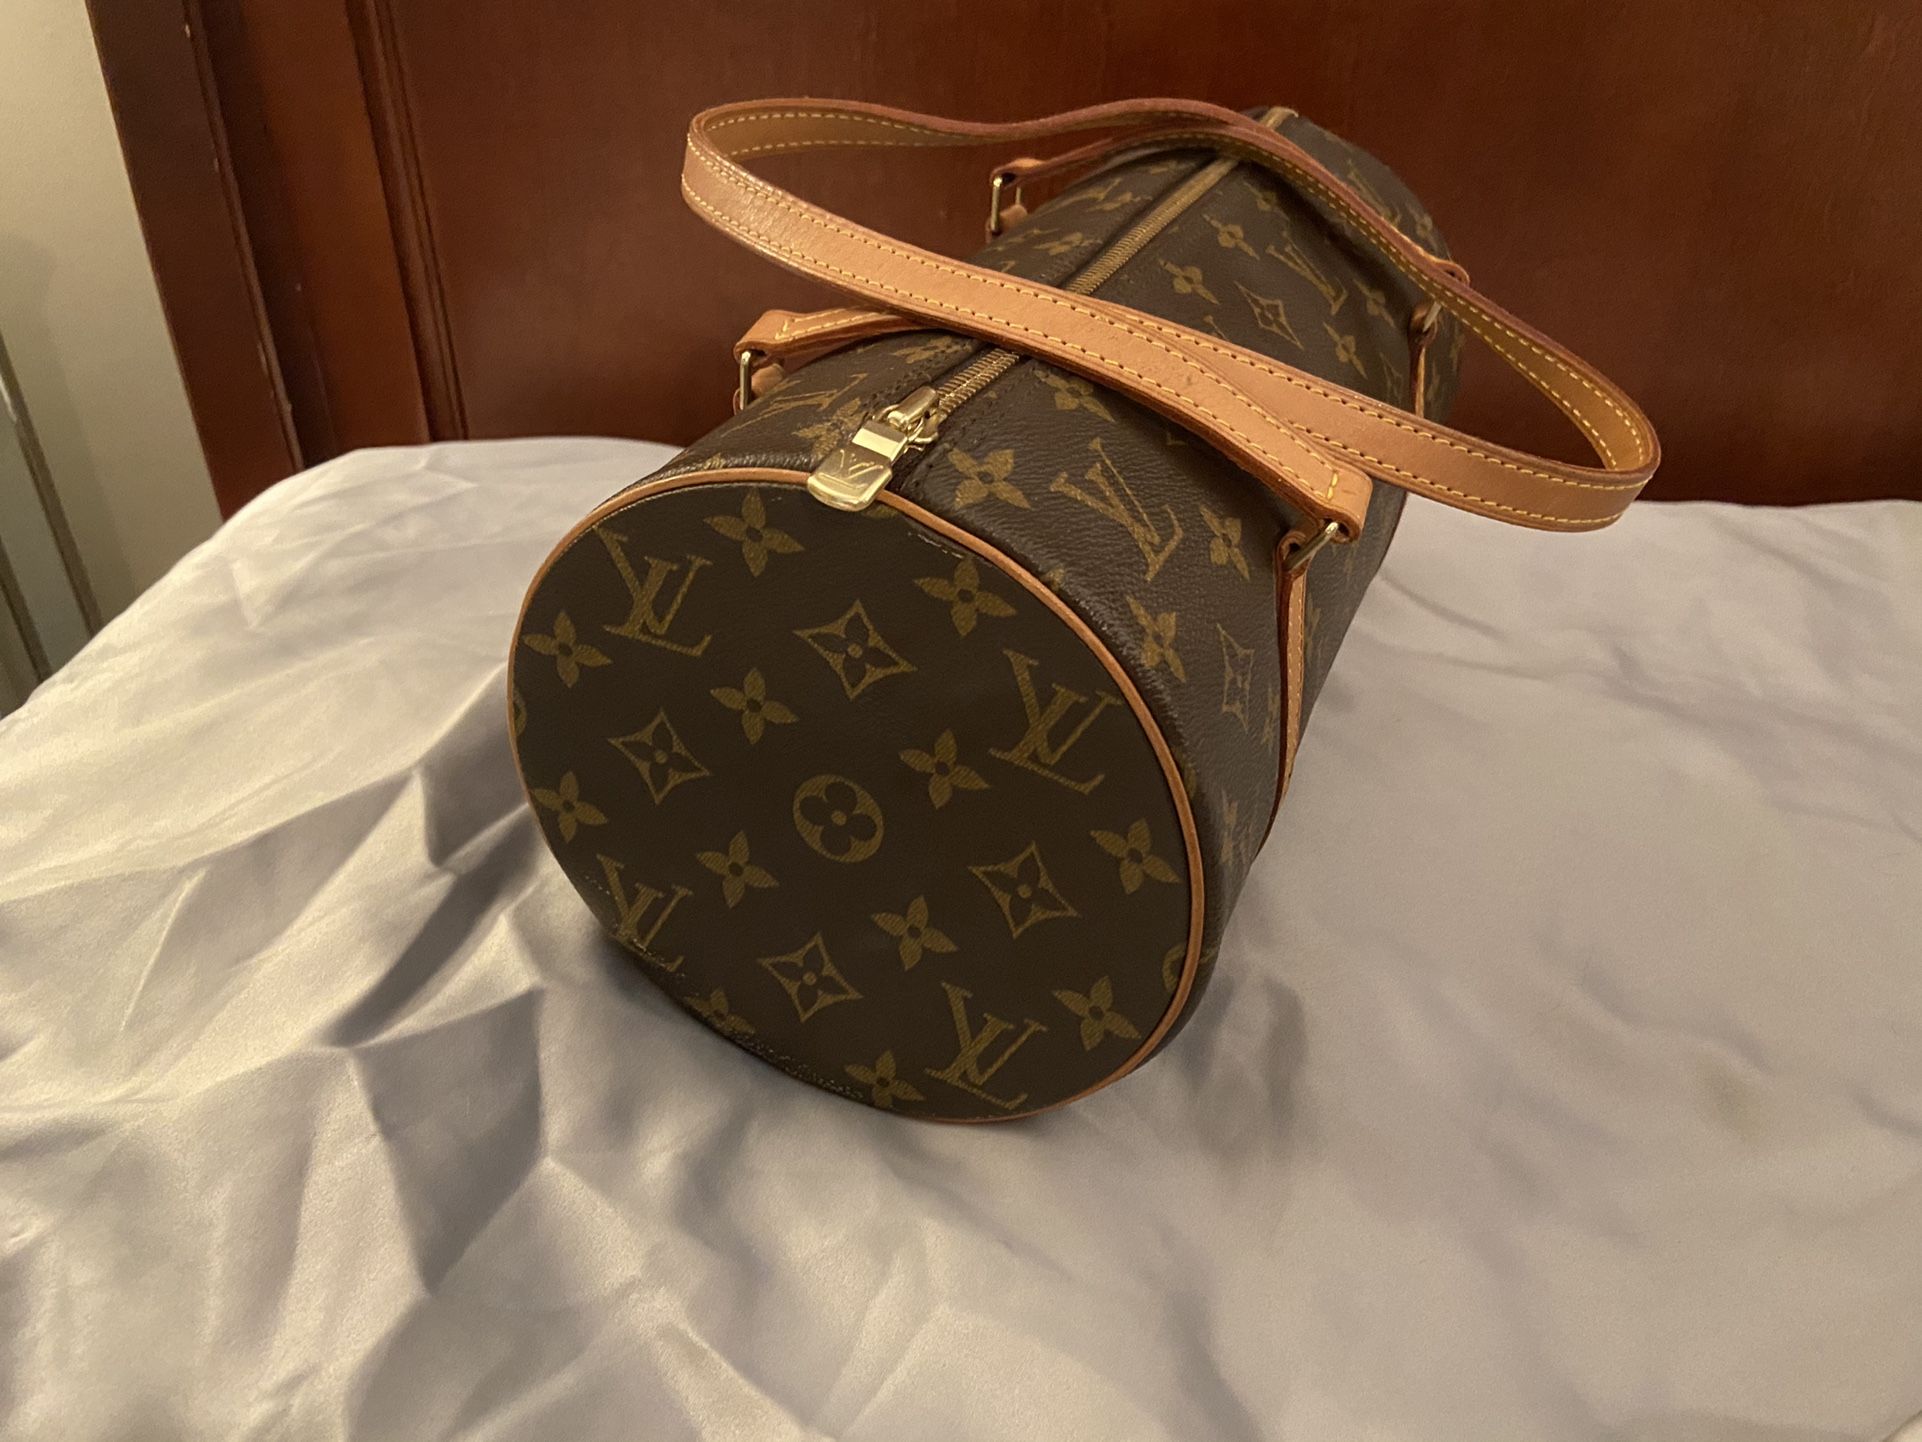 Louis Vuitton Luggage for Sale in Mcdonough, GA - OfferUp